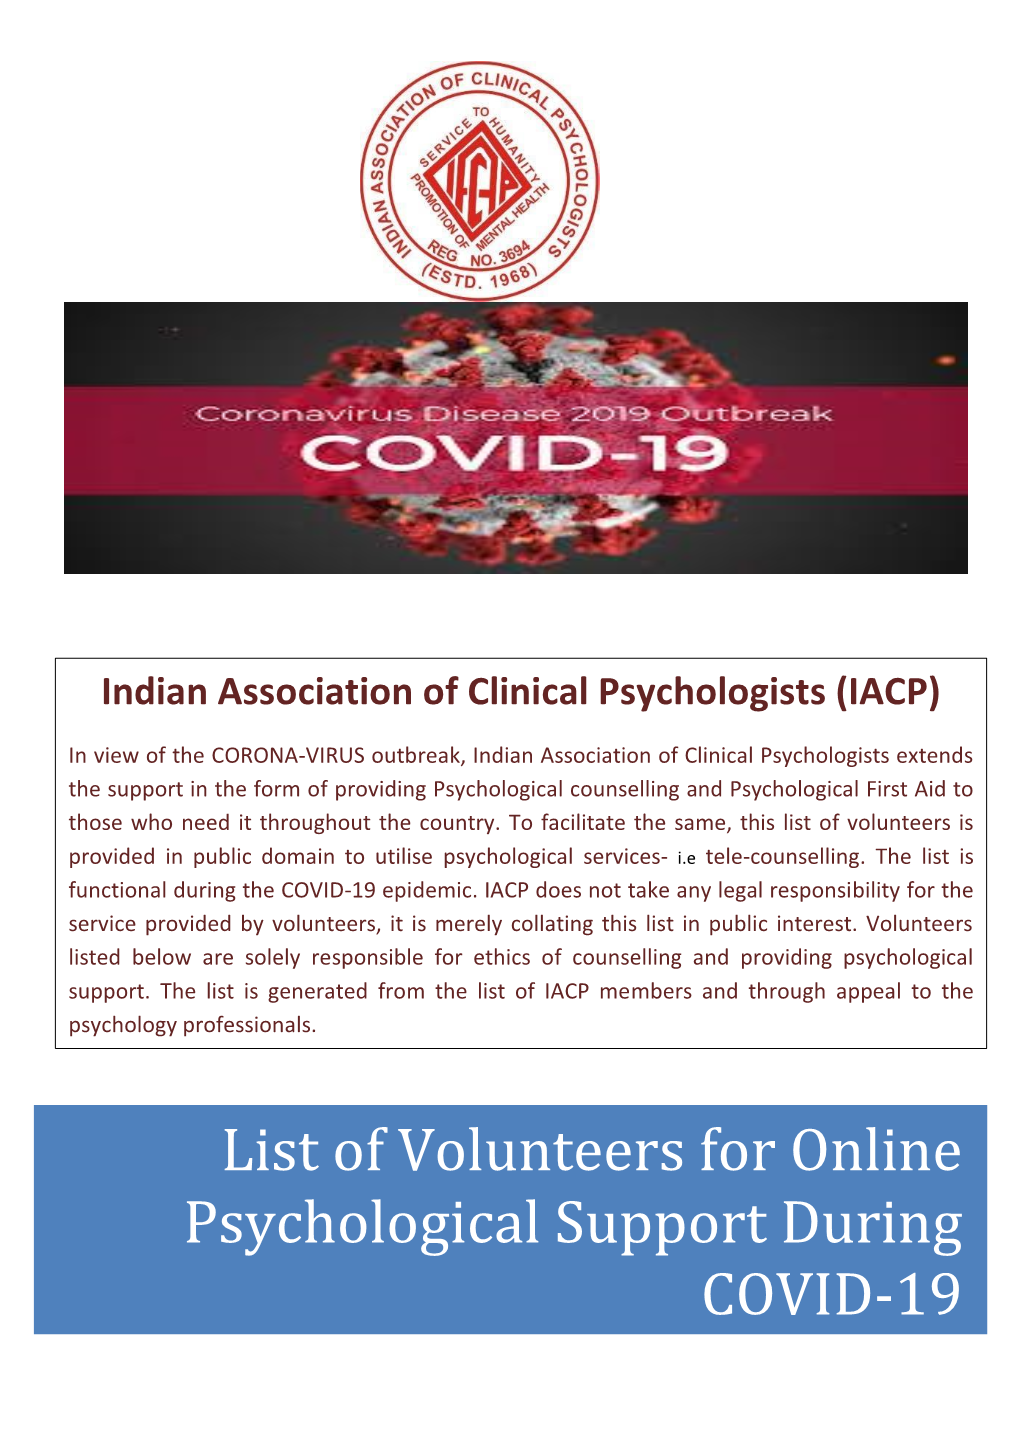 List of Volunteers for Online Psychological Support During COVID-19 List of Volunteers for COVID-19 Tele-Support Name Contact No